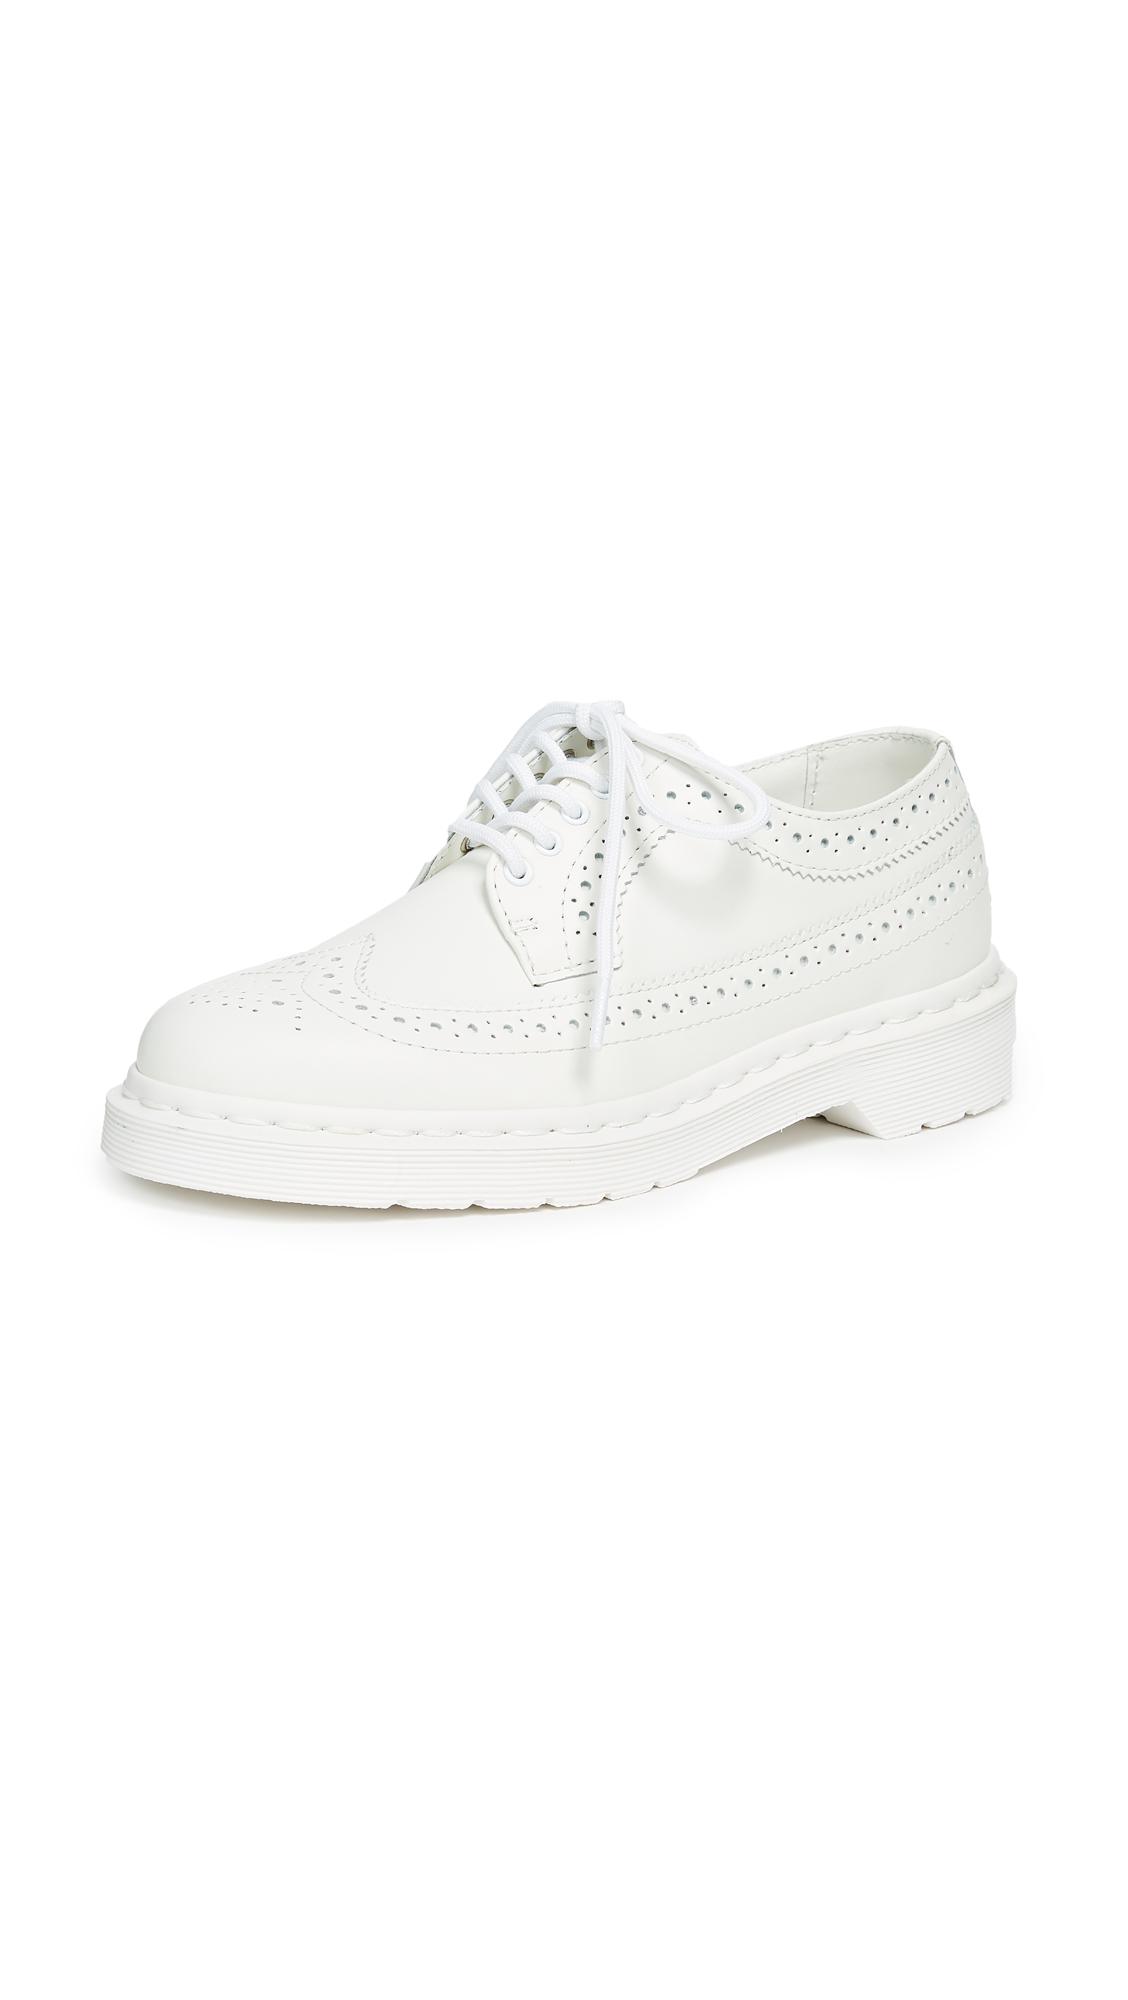 Dr. Martens 3989 Mono Shoes in White | Lyst